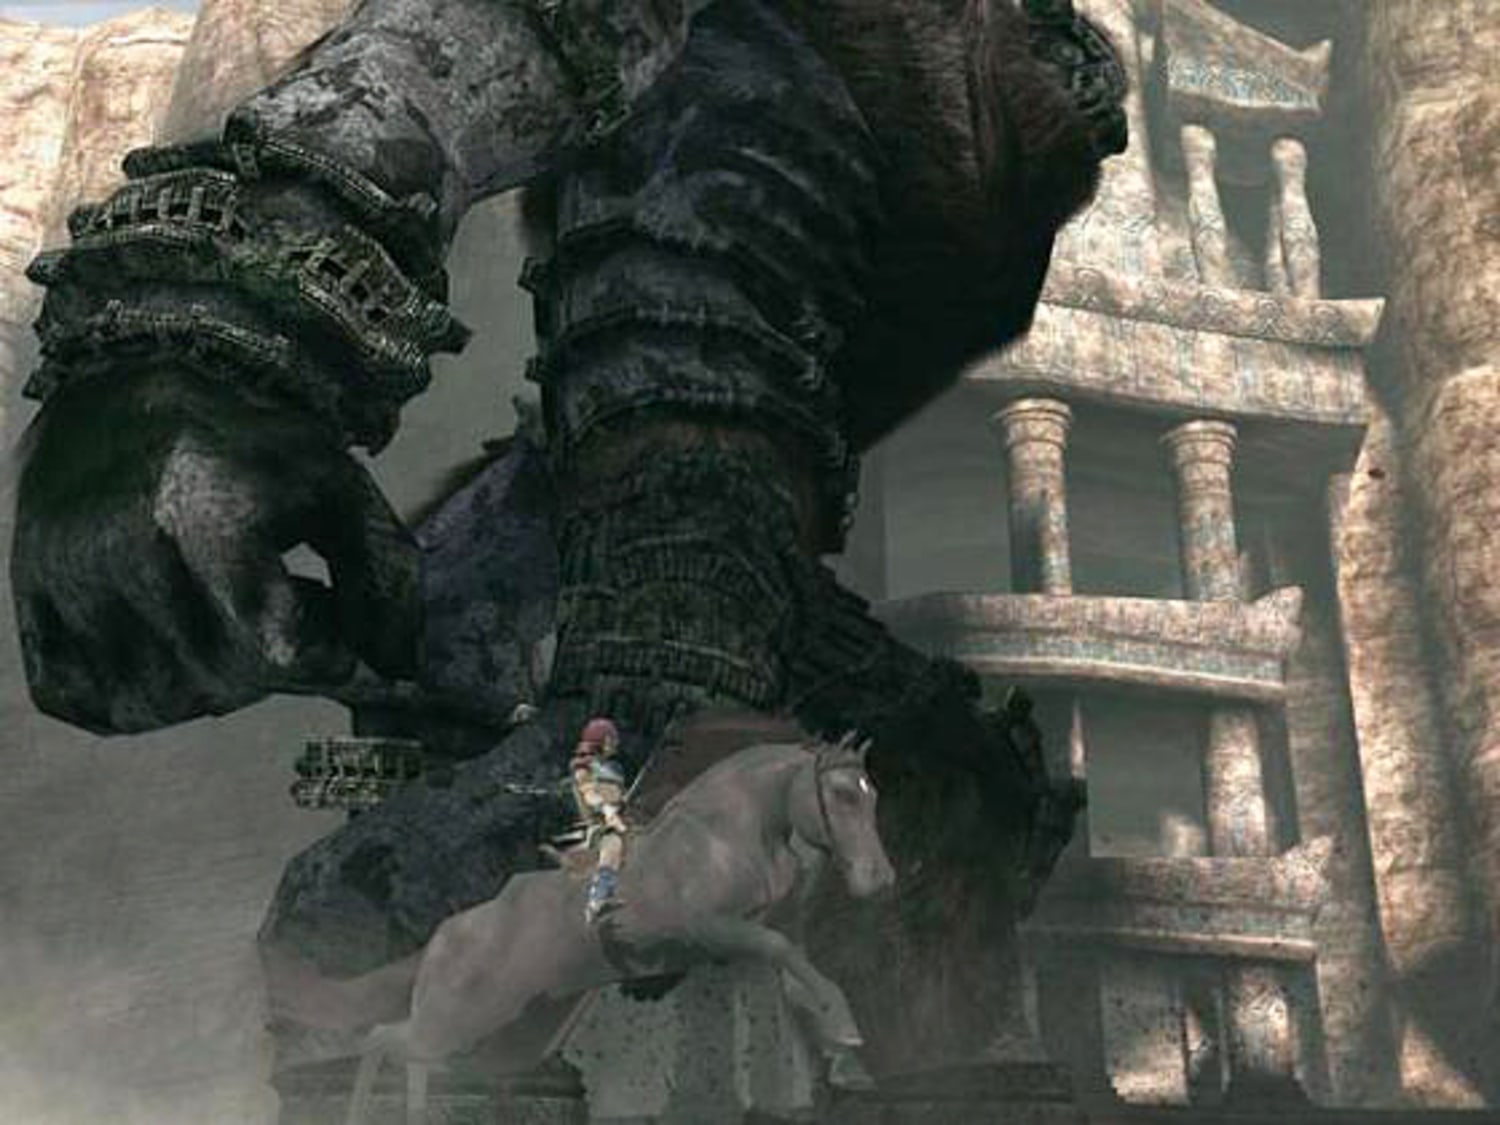 Shadow of the Colossus Sony PlayStation 2 Video Games for sale